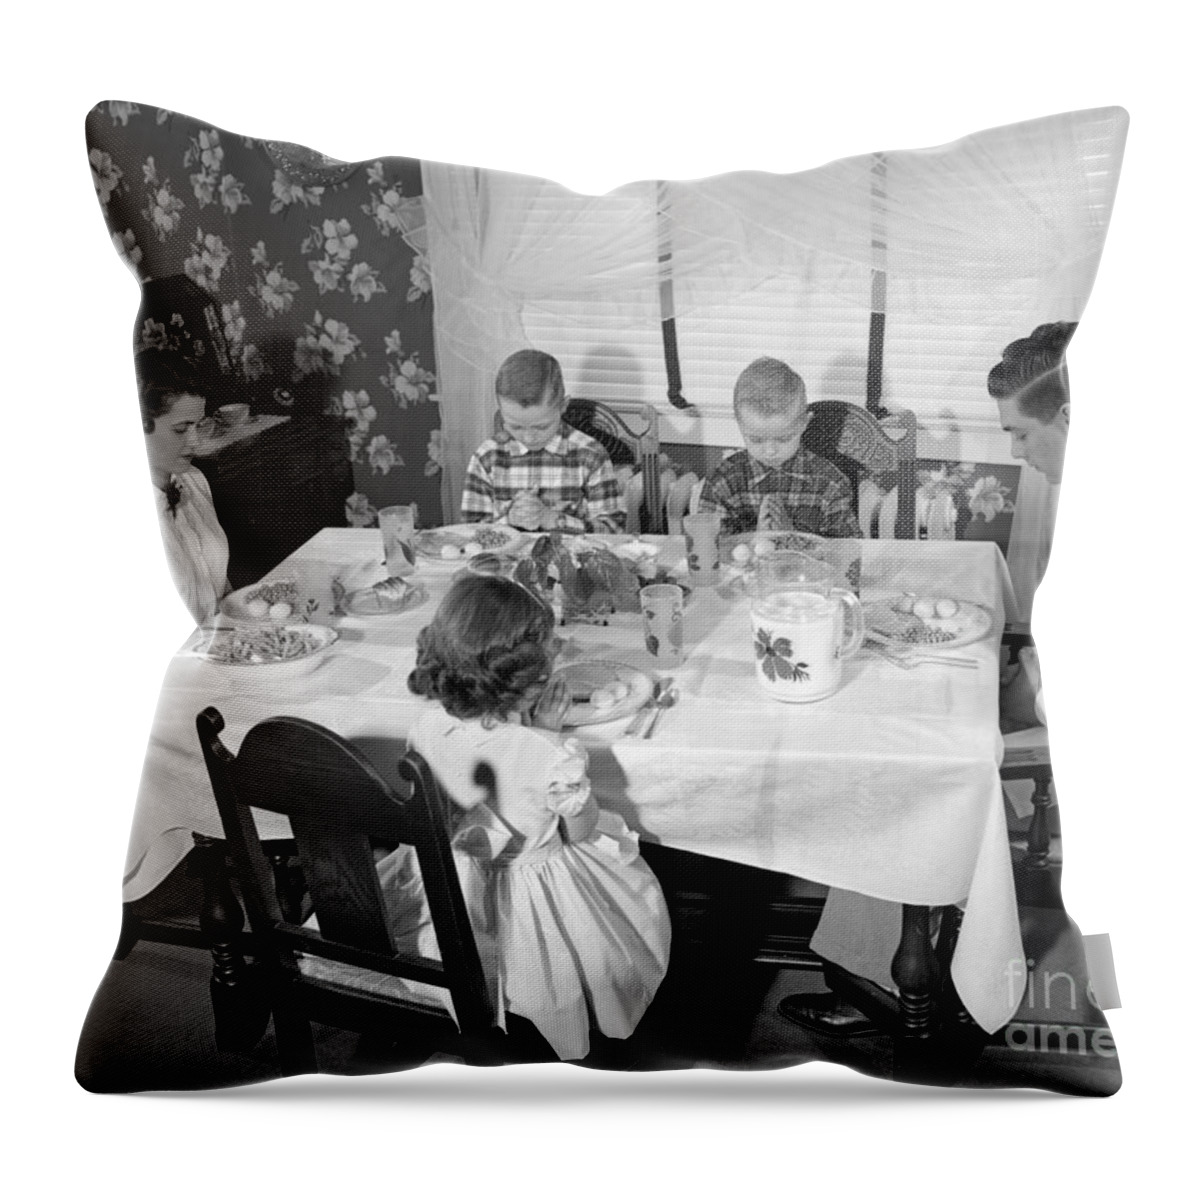 1950s Throw Pillow featuring the photograph Family Saying Grace, C.1950s by H. Armstrong Roberts/ClassicStock